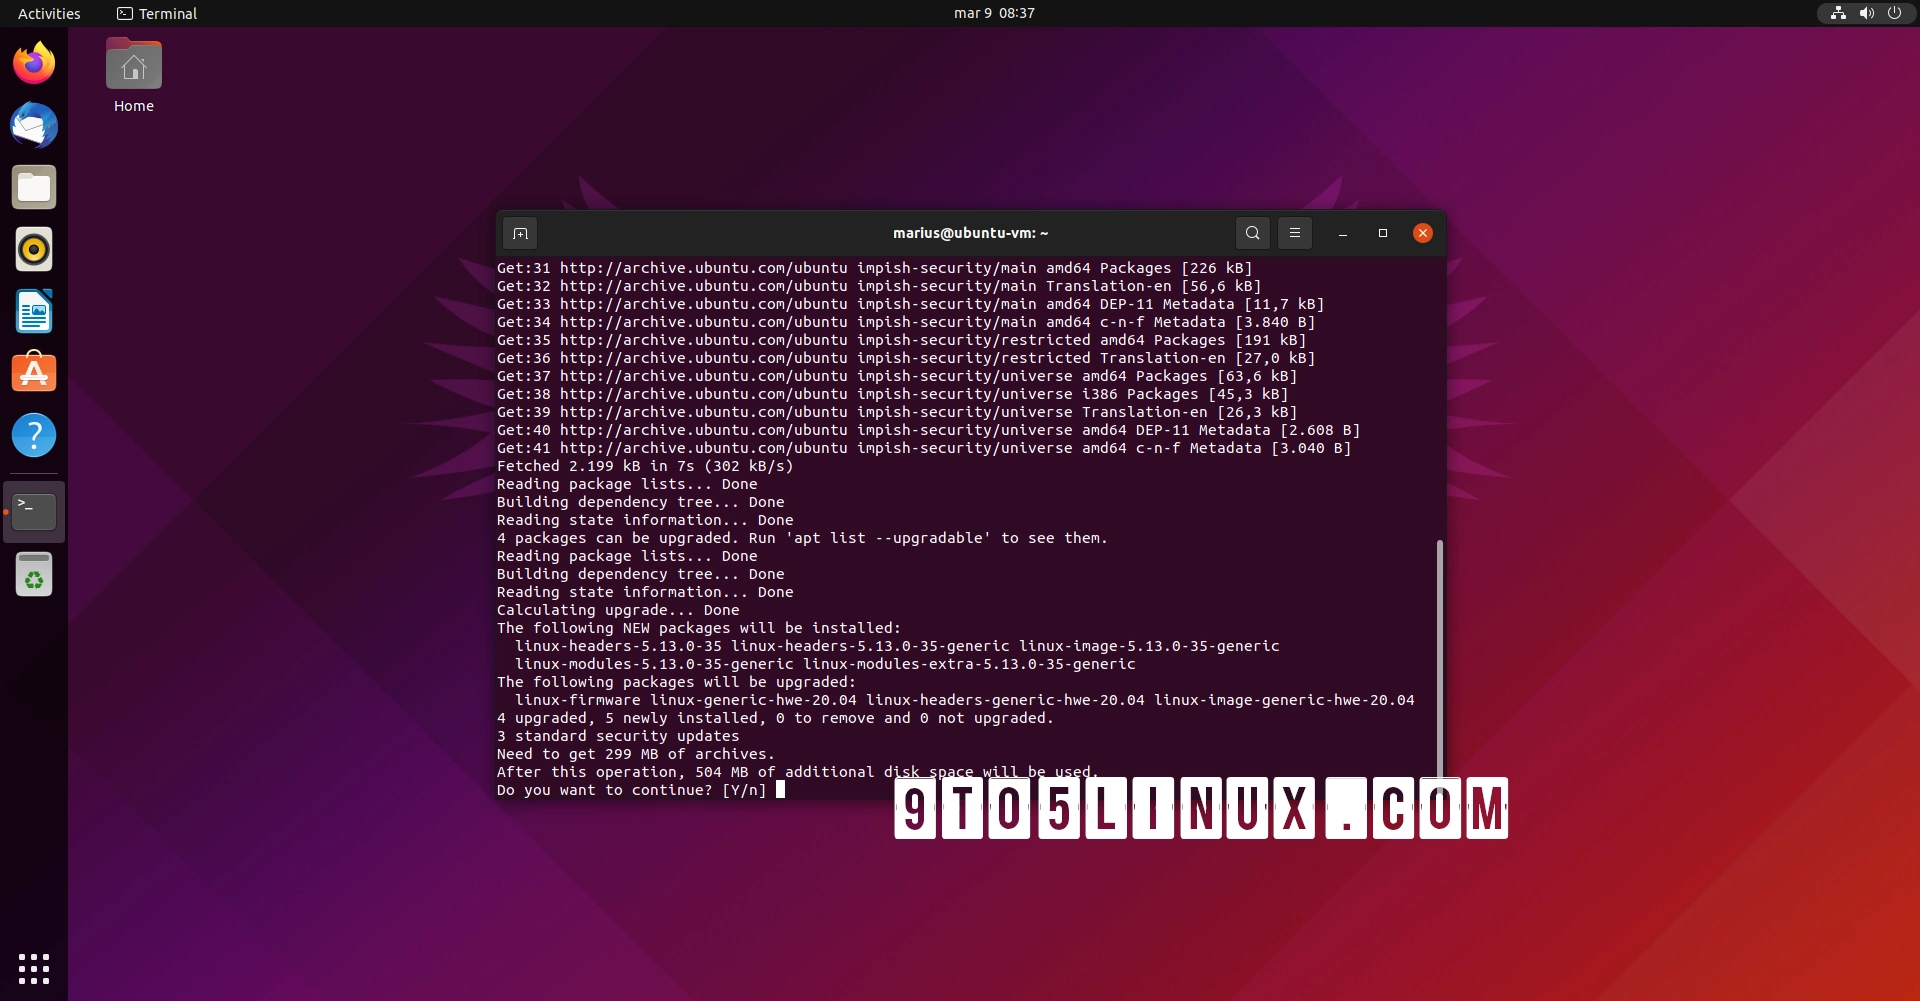 Canonical Patches “Dirty Pipe” Vulnerability in Ubuntu 21.10 and 20.04 LTS, Update Now